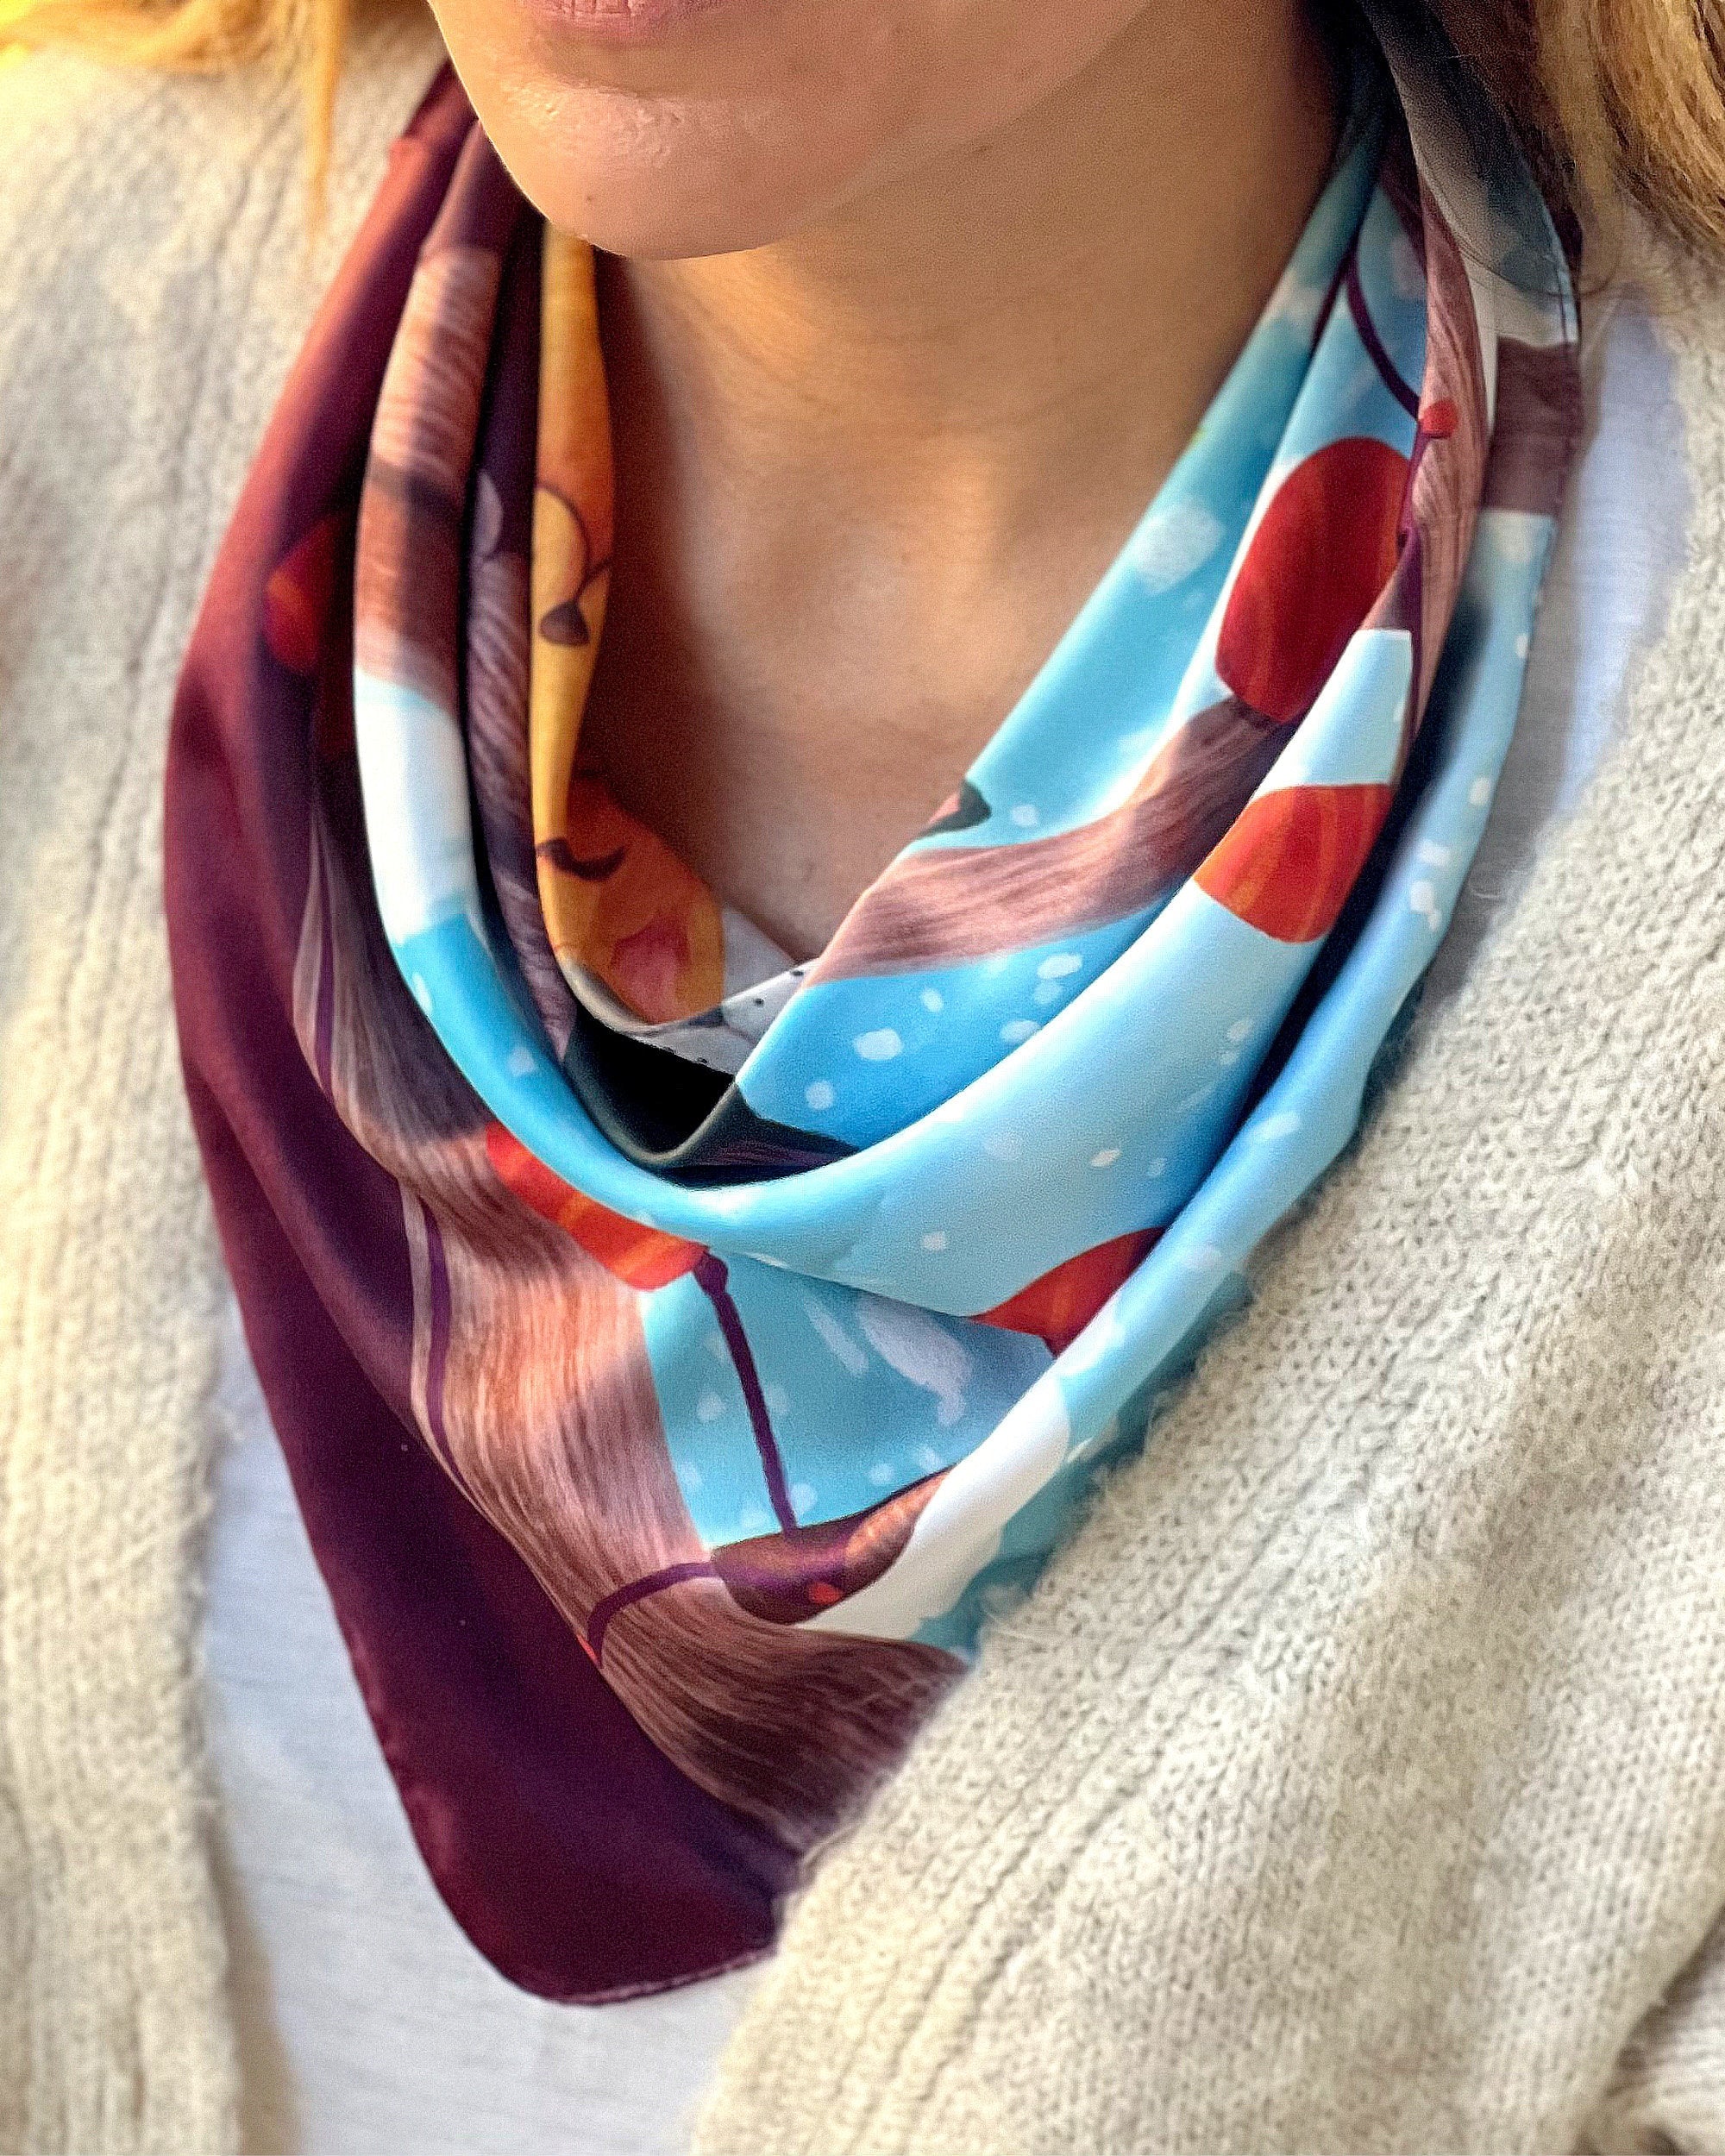 If you are a fan of cat designs, then you will love our cat pattern neck scarf. It is made from the softest materials and features a beautiful cat pattern design that will complement any outfit.